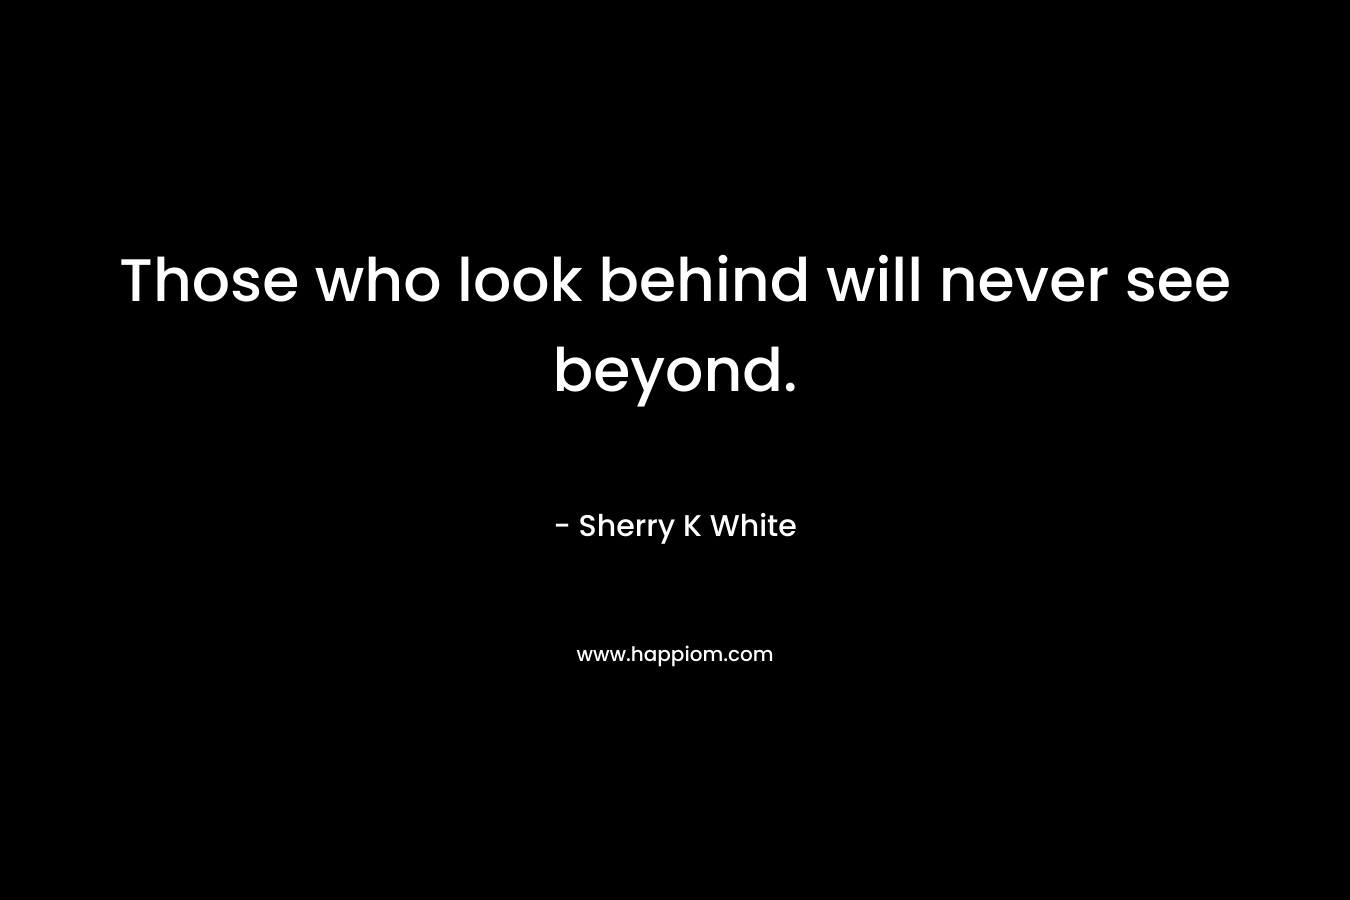 Those who look behind will never see beyond. – Sherry K White